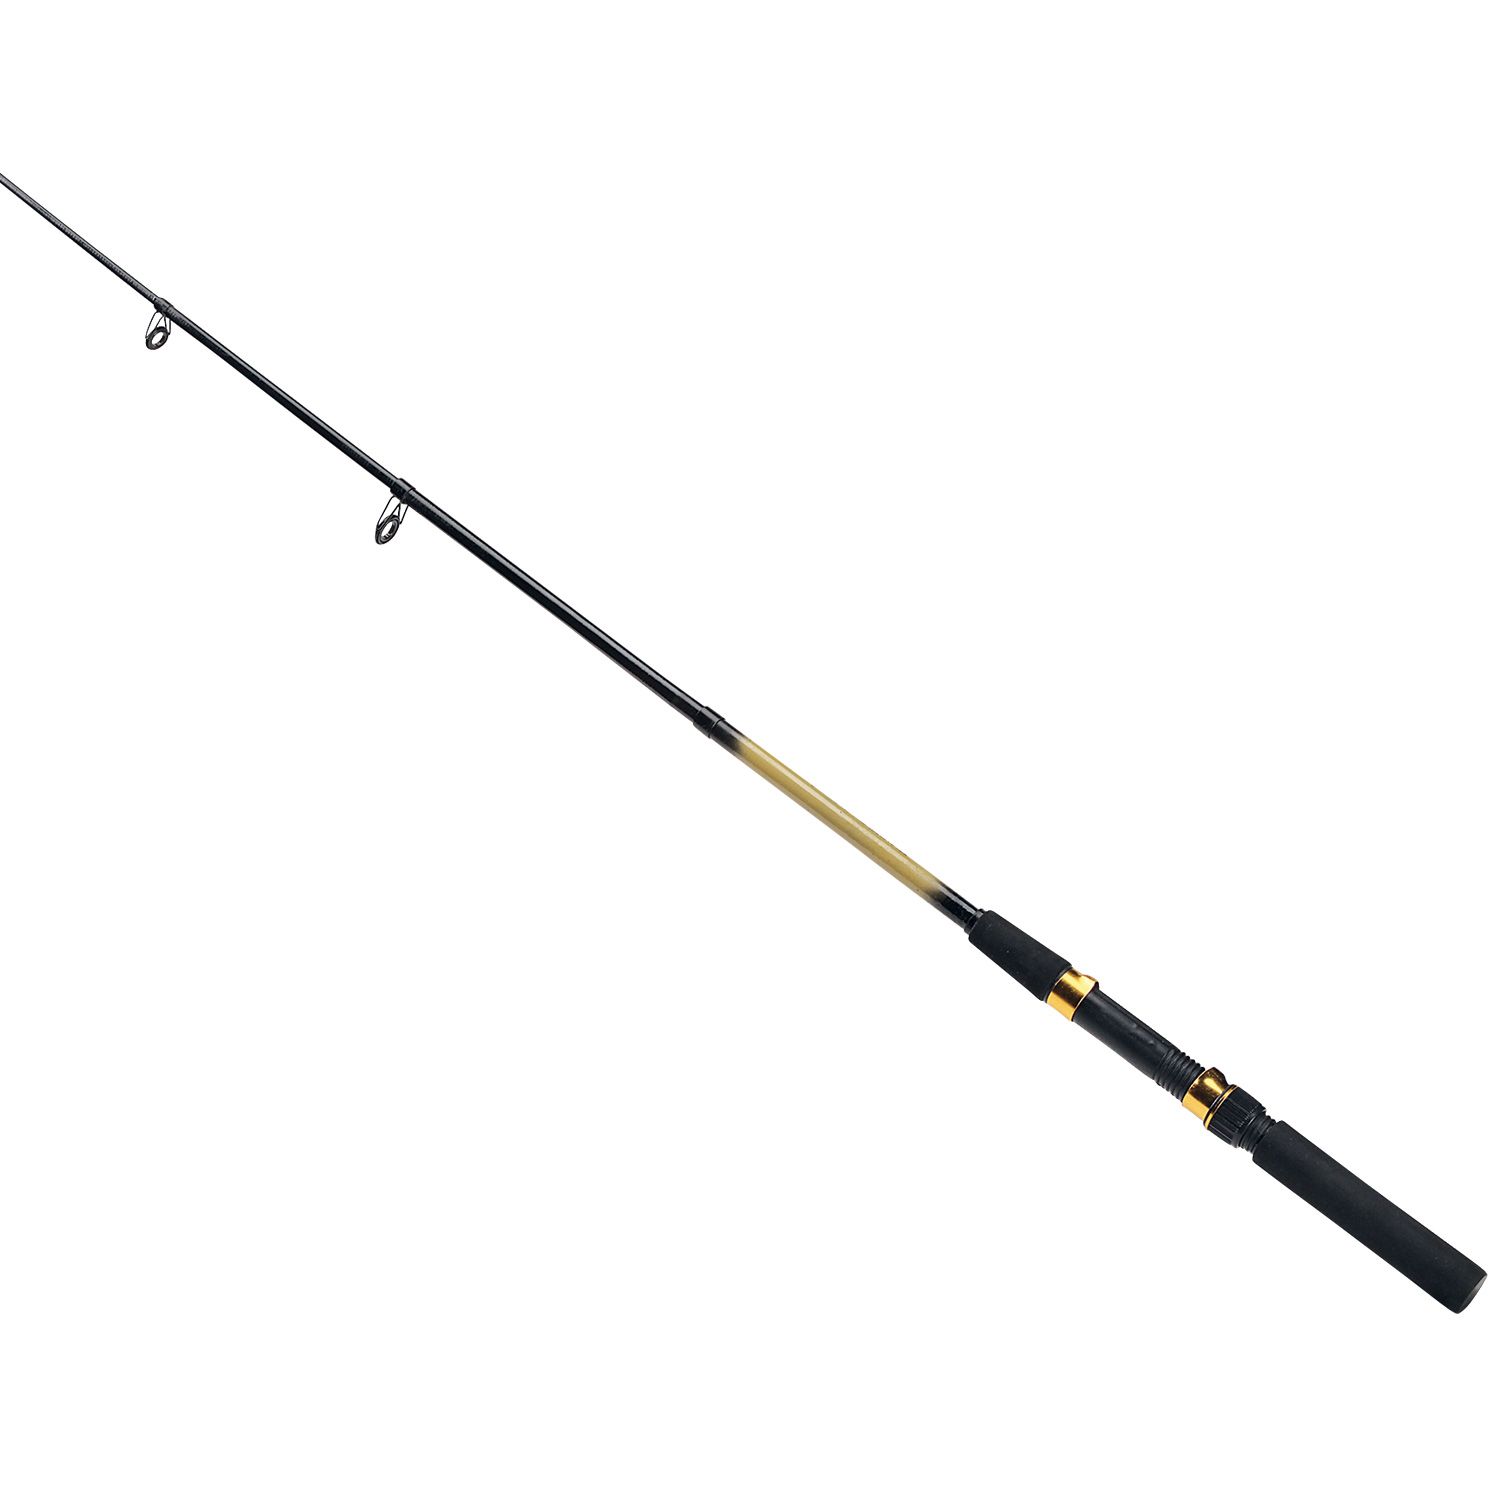 Picture of a fishing pole clipart